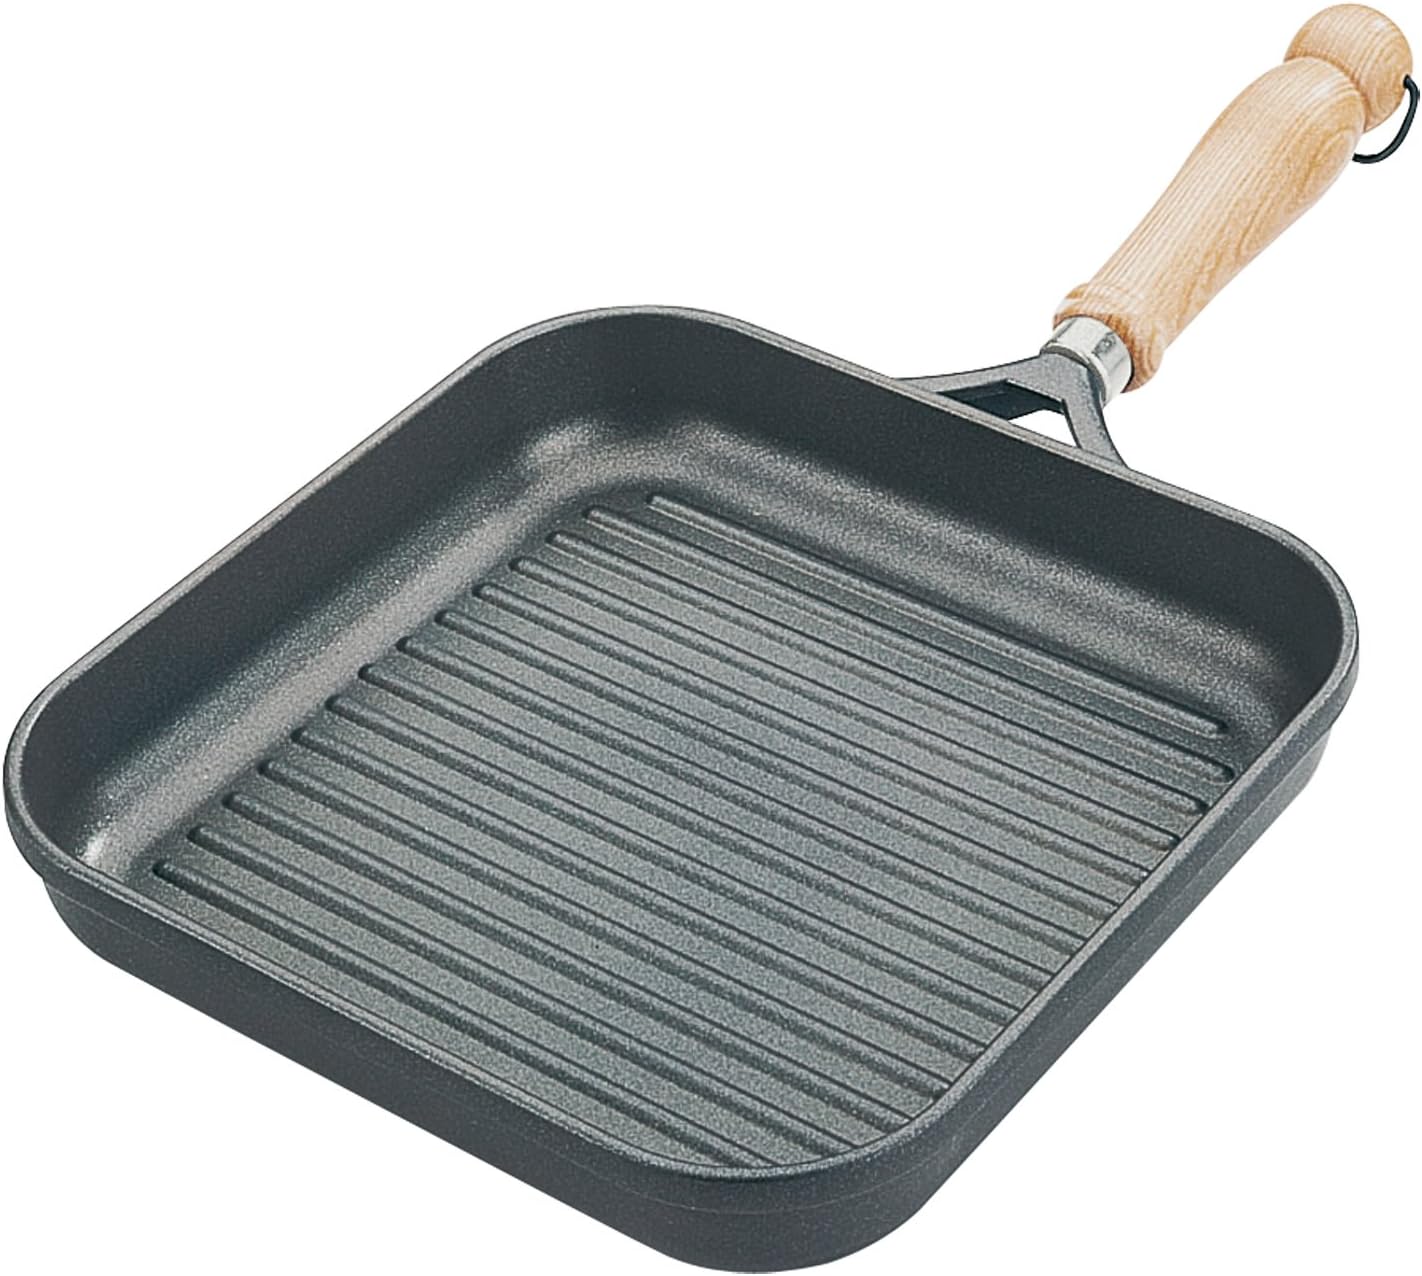 Berndes Tradition Grill Pan